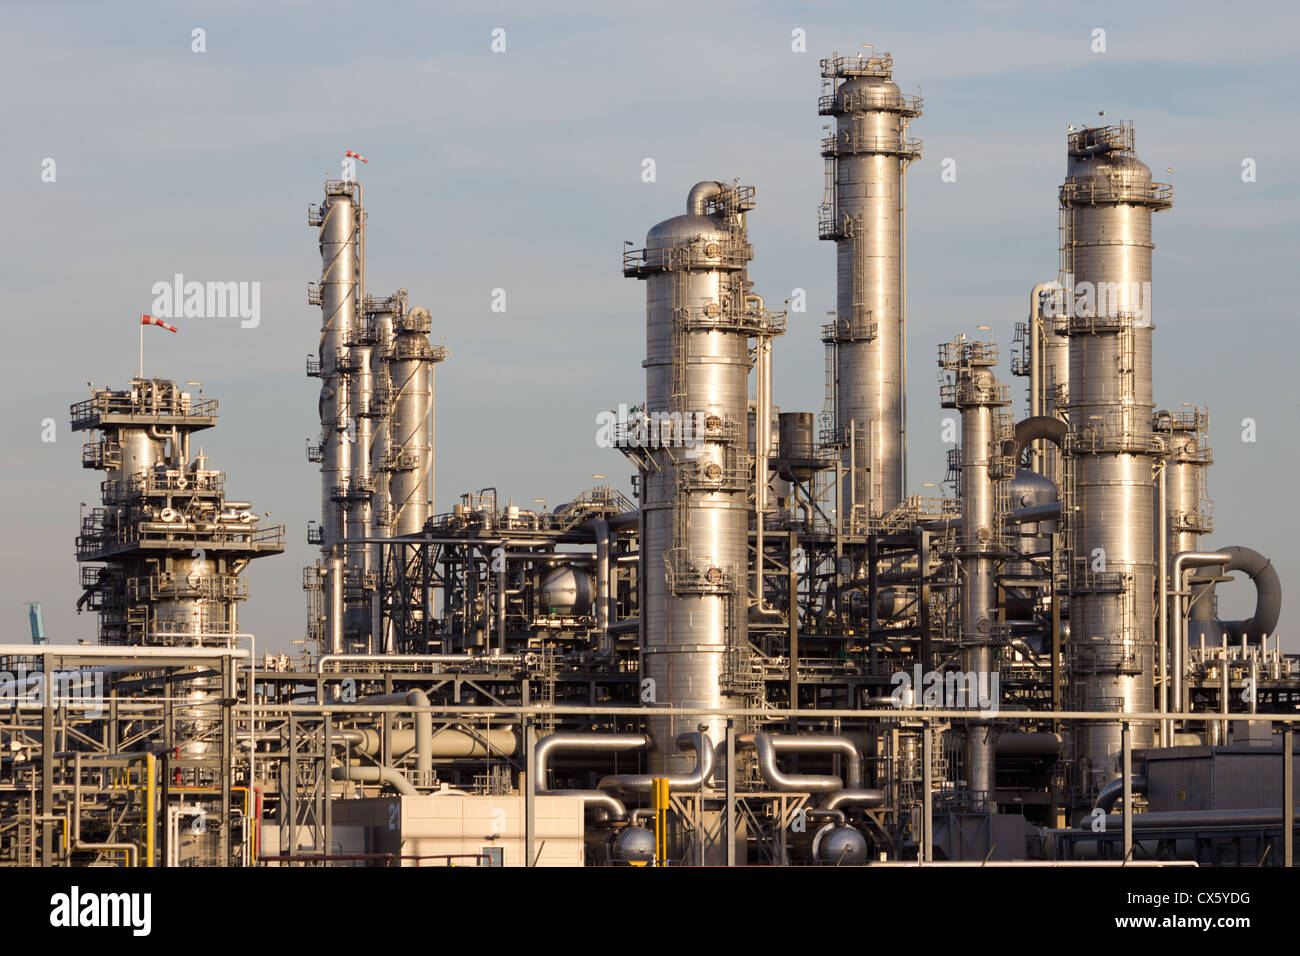 petrochemical industrial plant Stock Photo